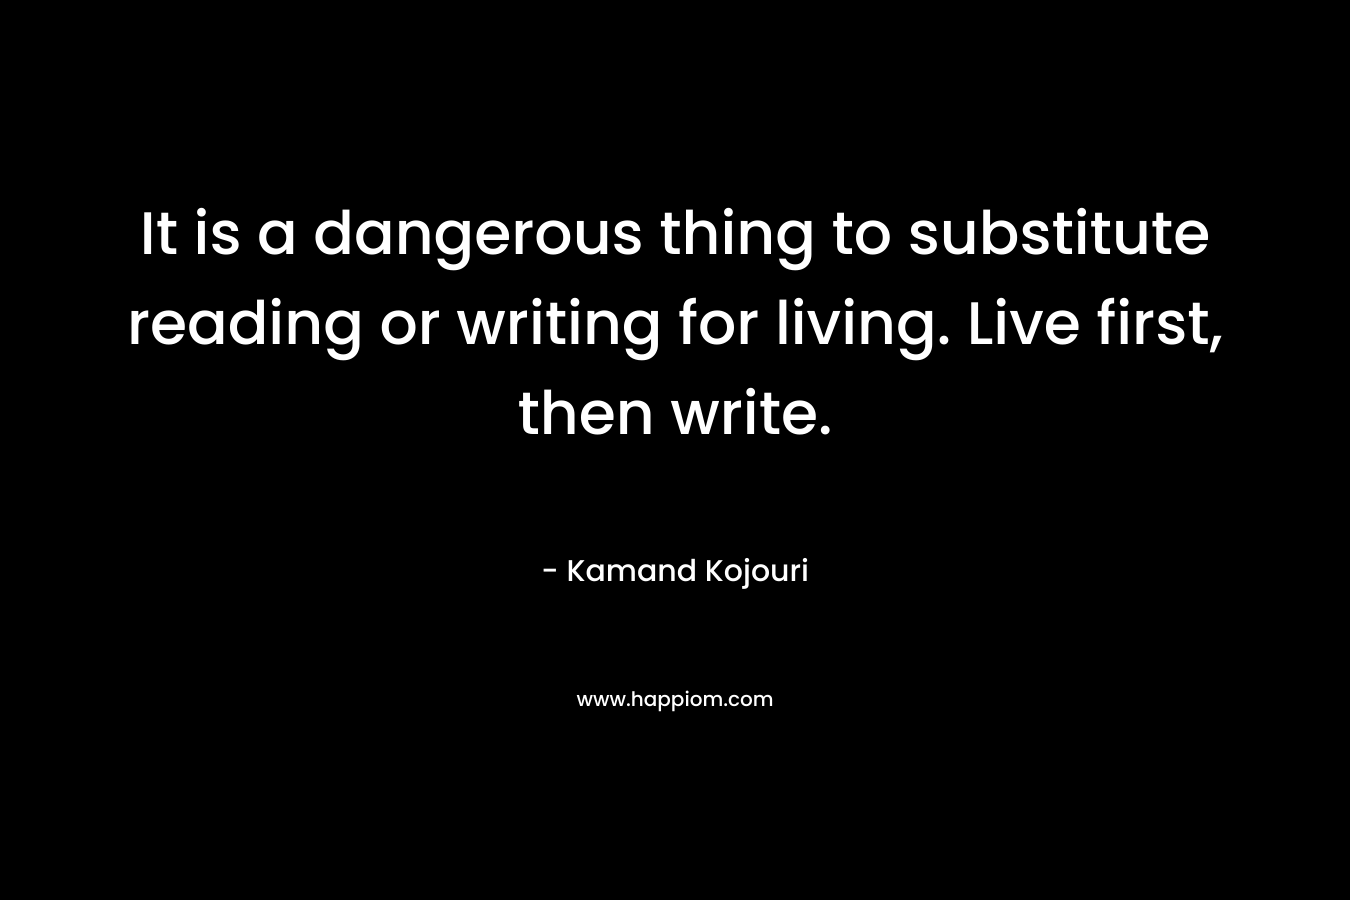 It is a dangerous thing to substitute reading or writing for living. Live first, then write.